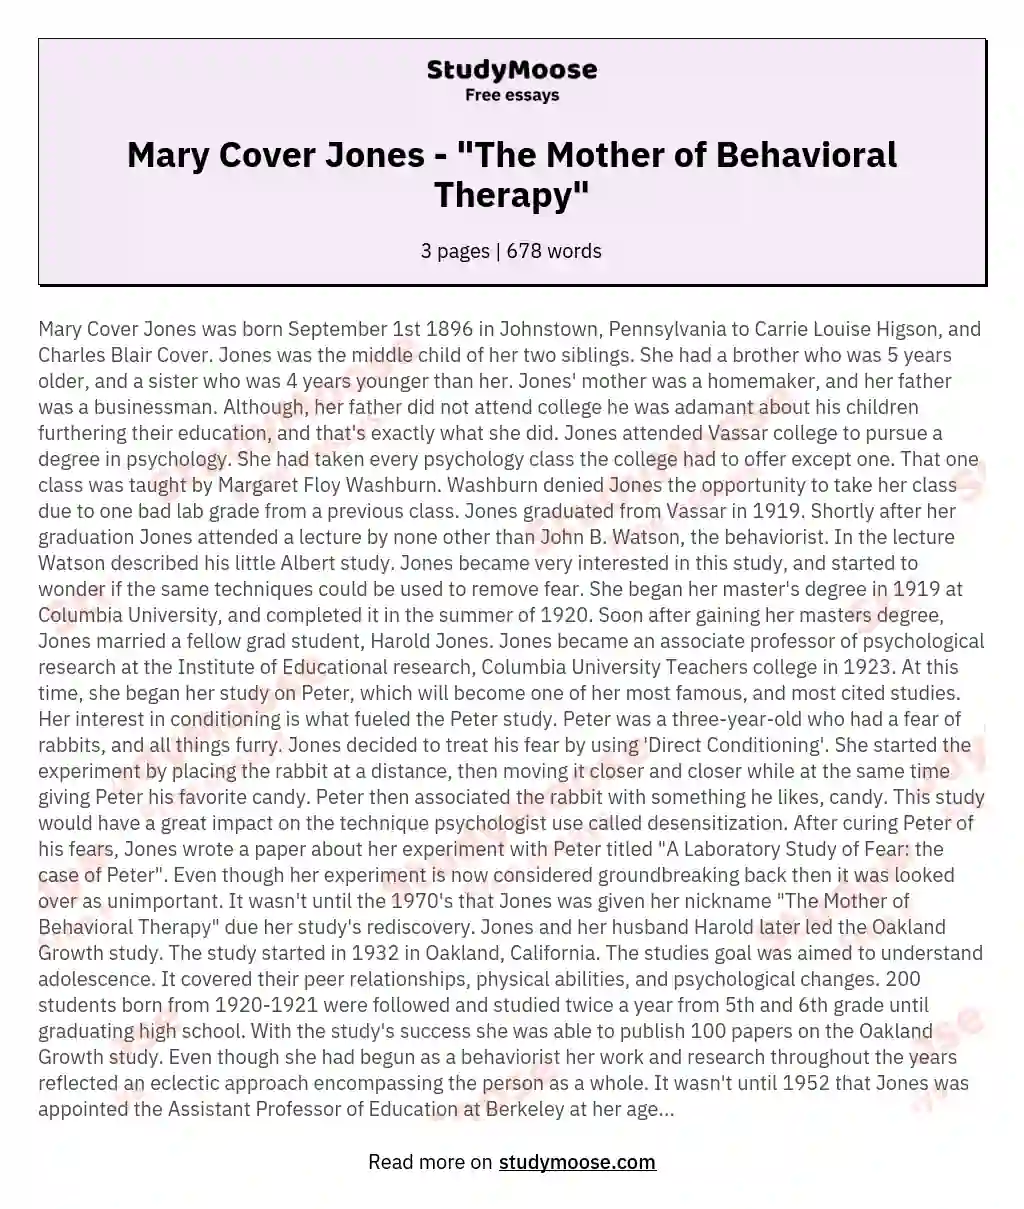 Mary Cover Jones - "The Mother of Behavioral Therapy" essay